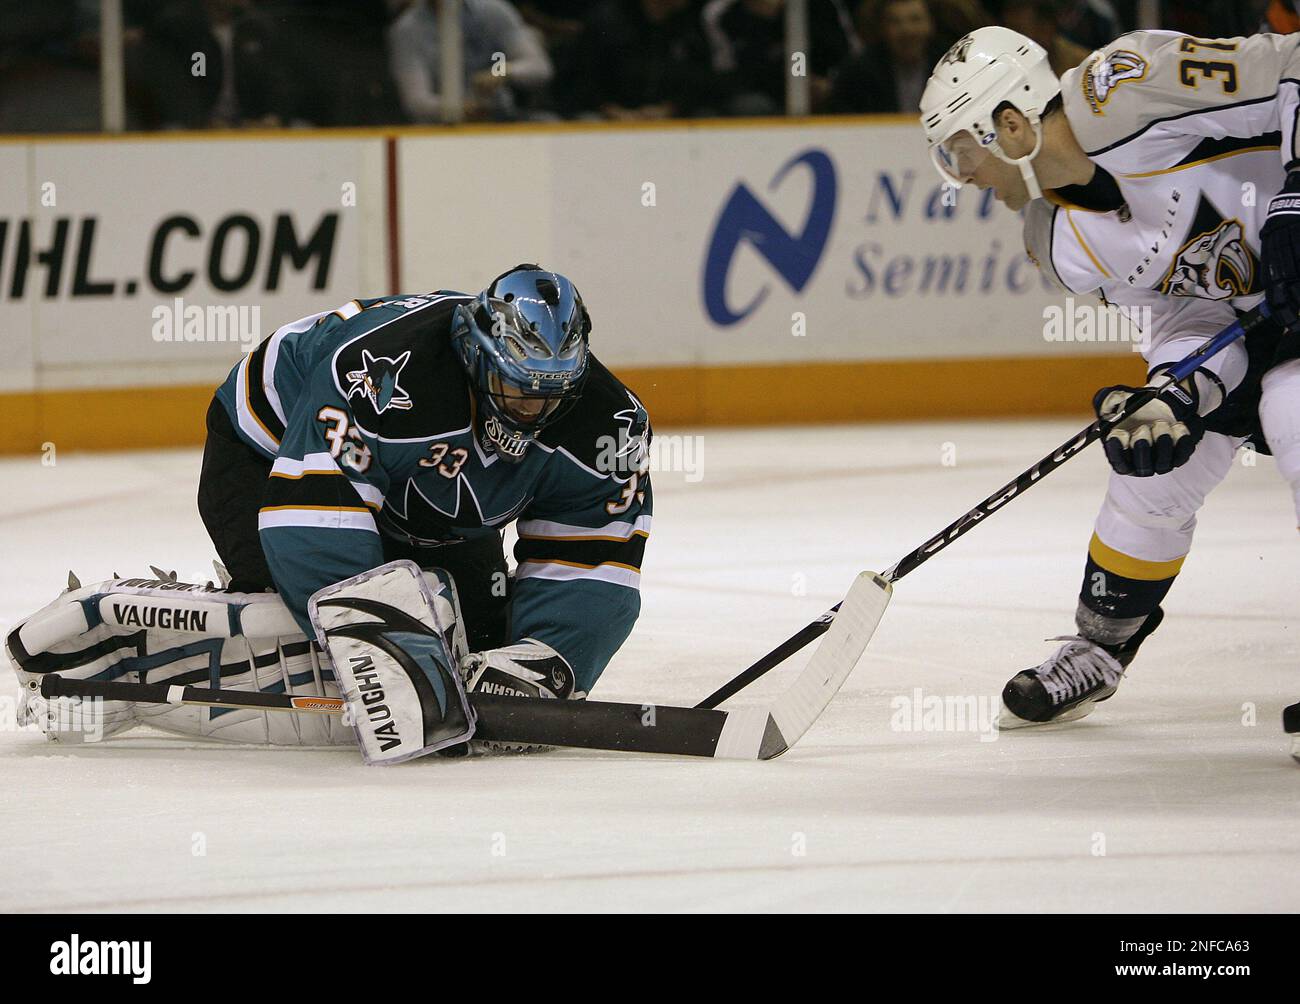 San Jose Sharks goalie Brian Boucher, left, blocks a shot on goal by Nashville Predators center Rich Peverley, right, during the first period of an NHL hockey game in San Jose, Calif.,